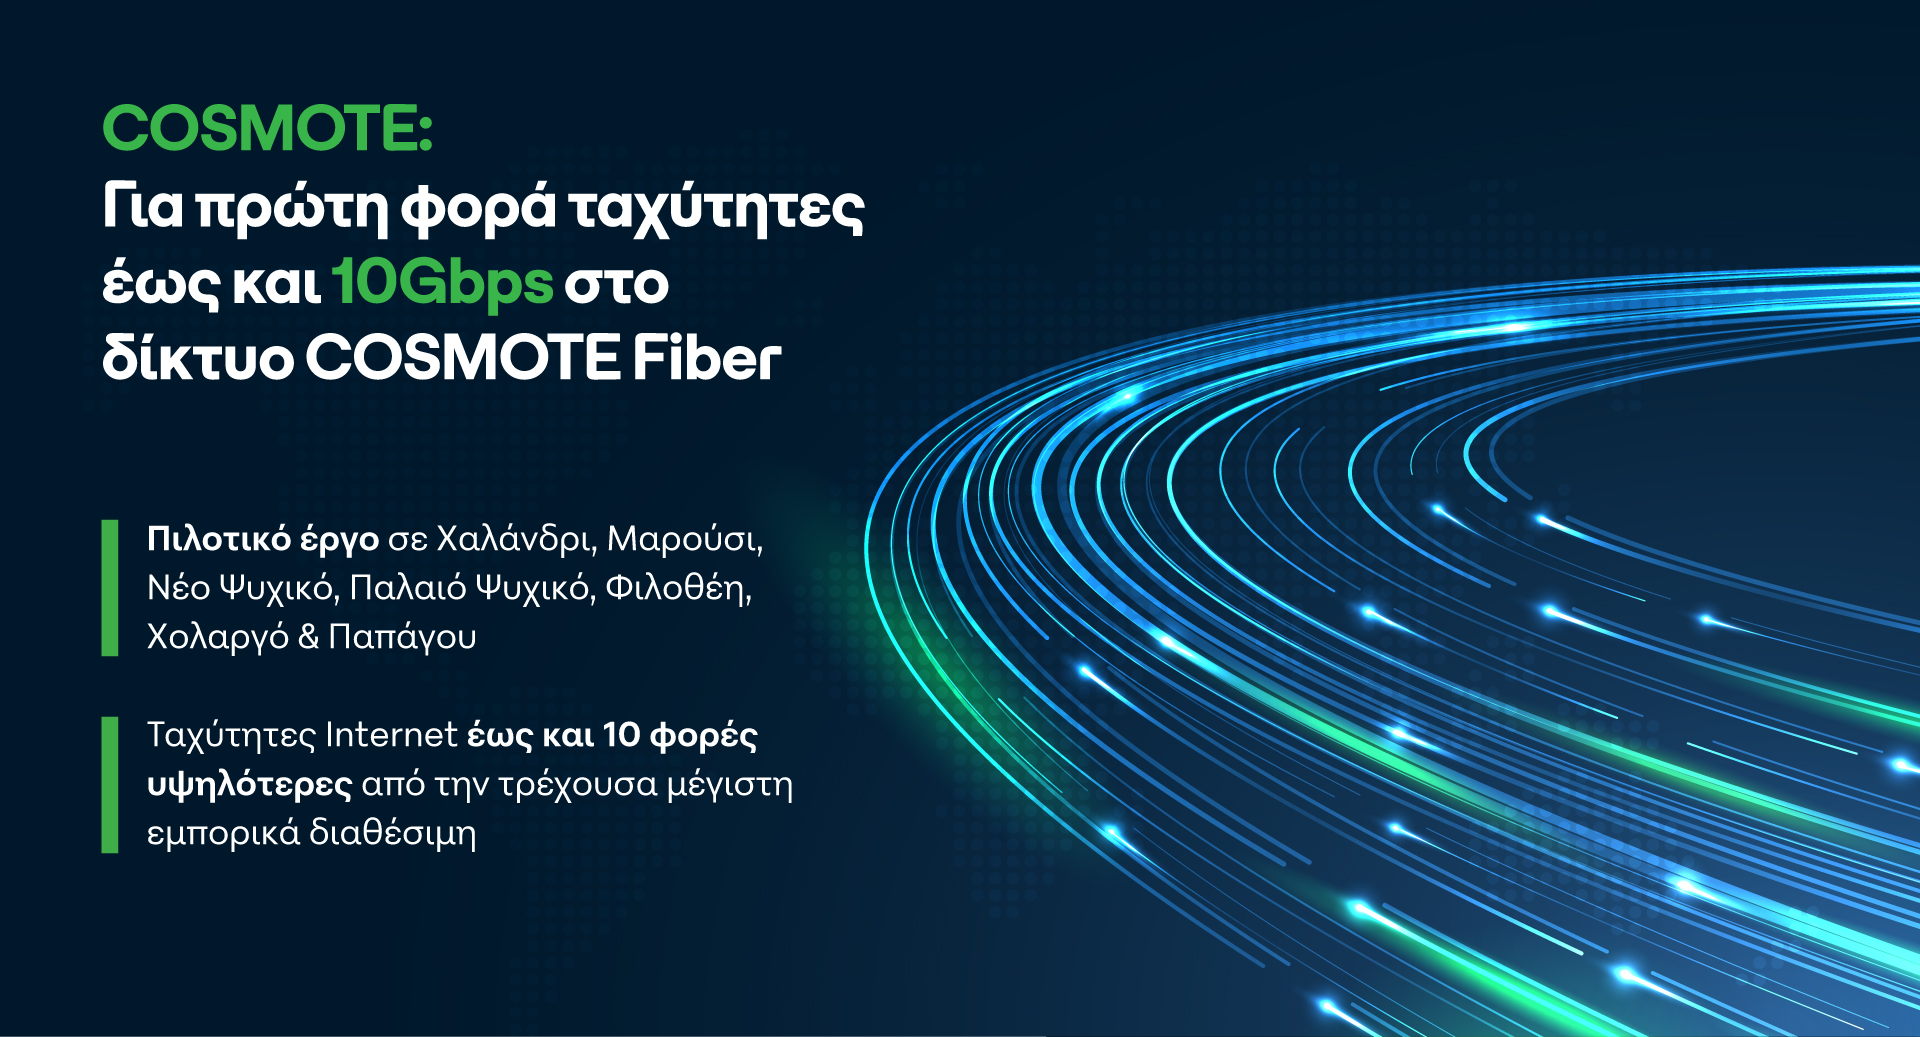 ©Cosmote